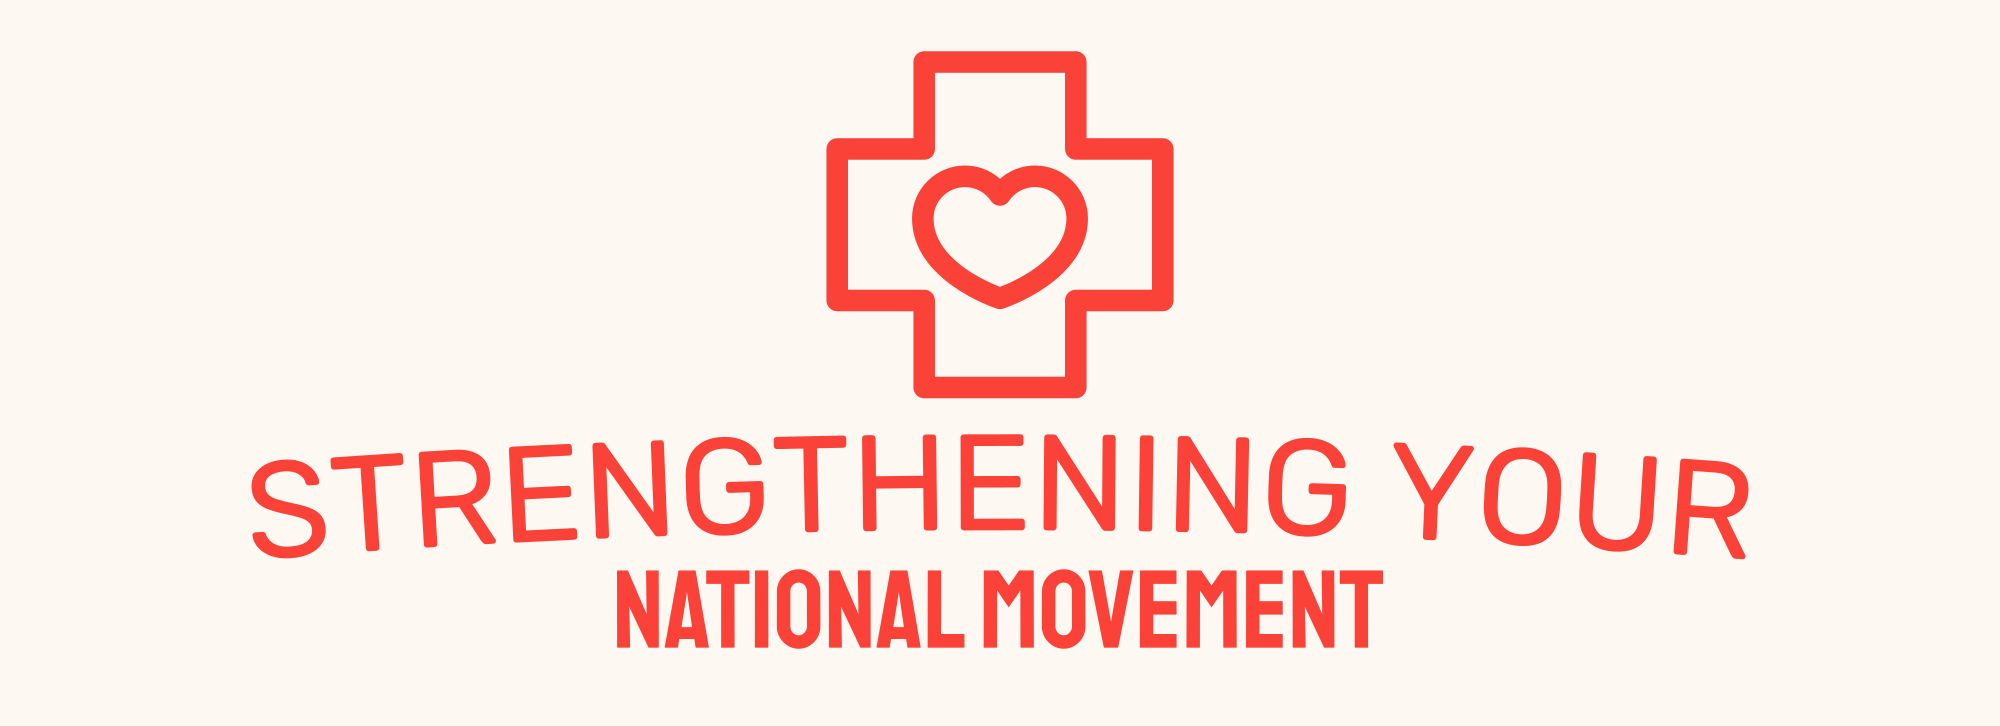 strengthening-your-national-movement banner